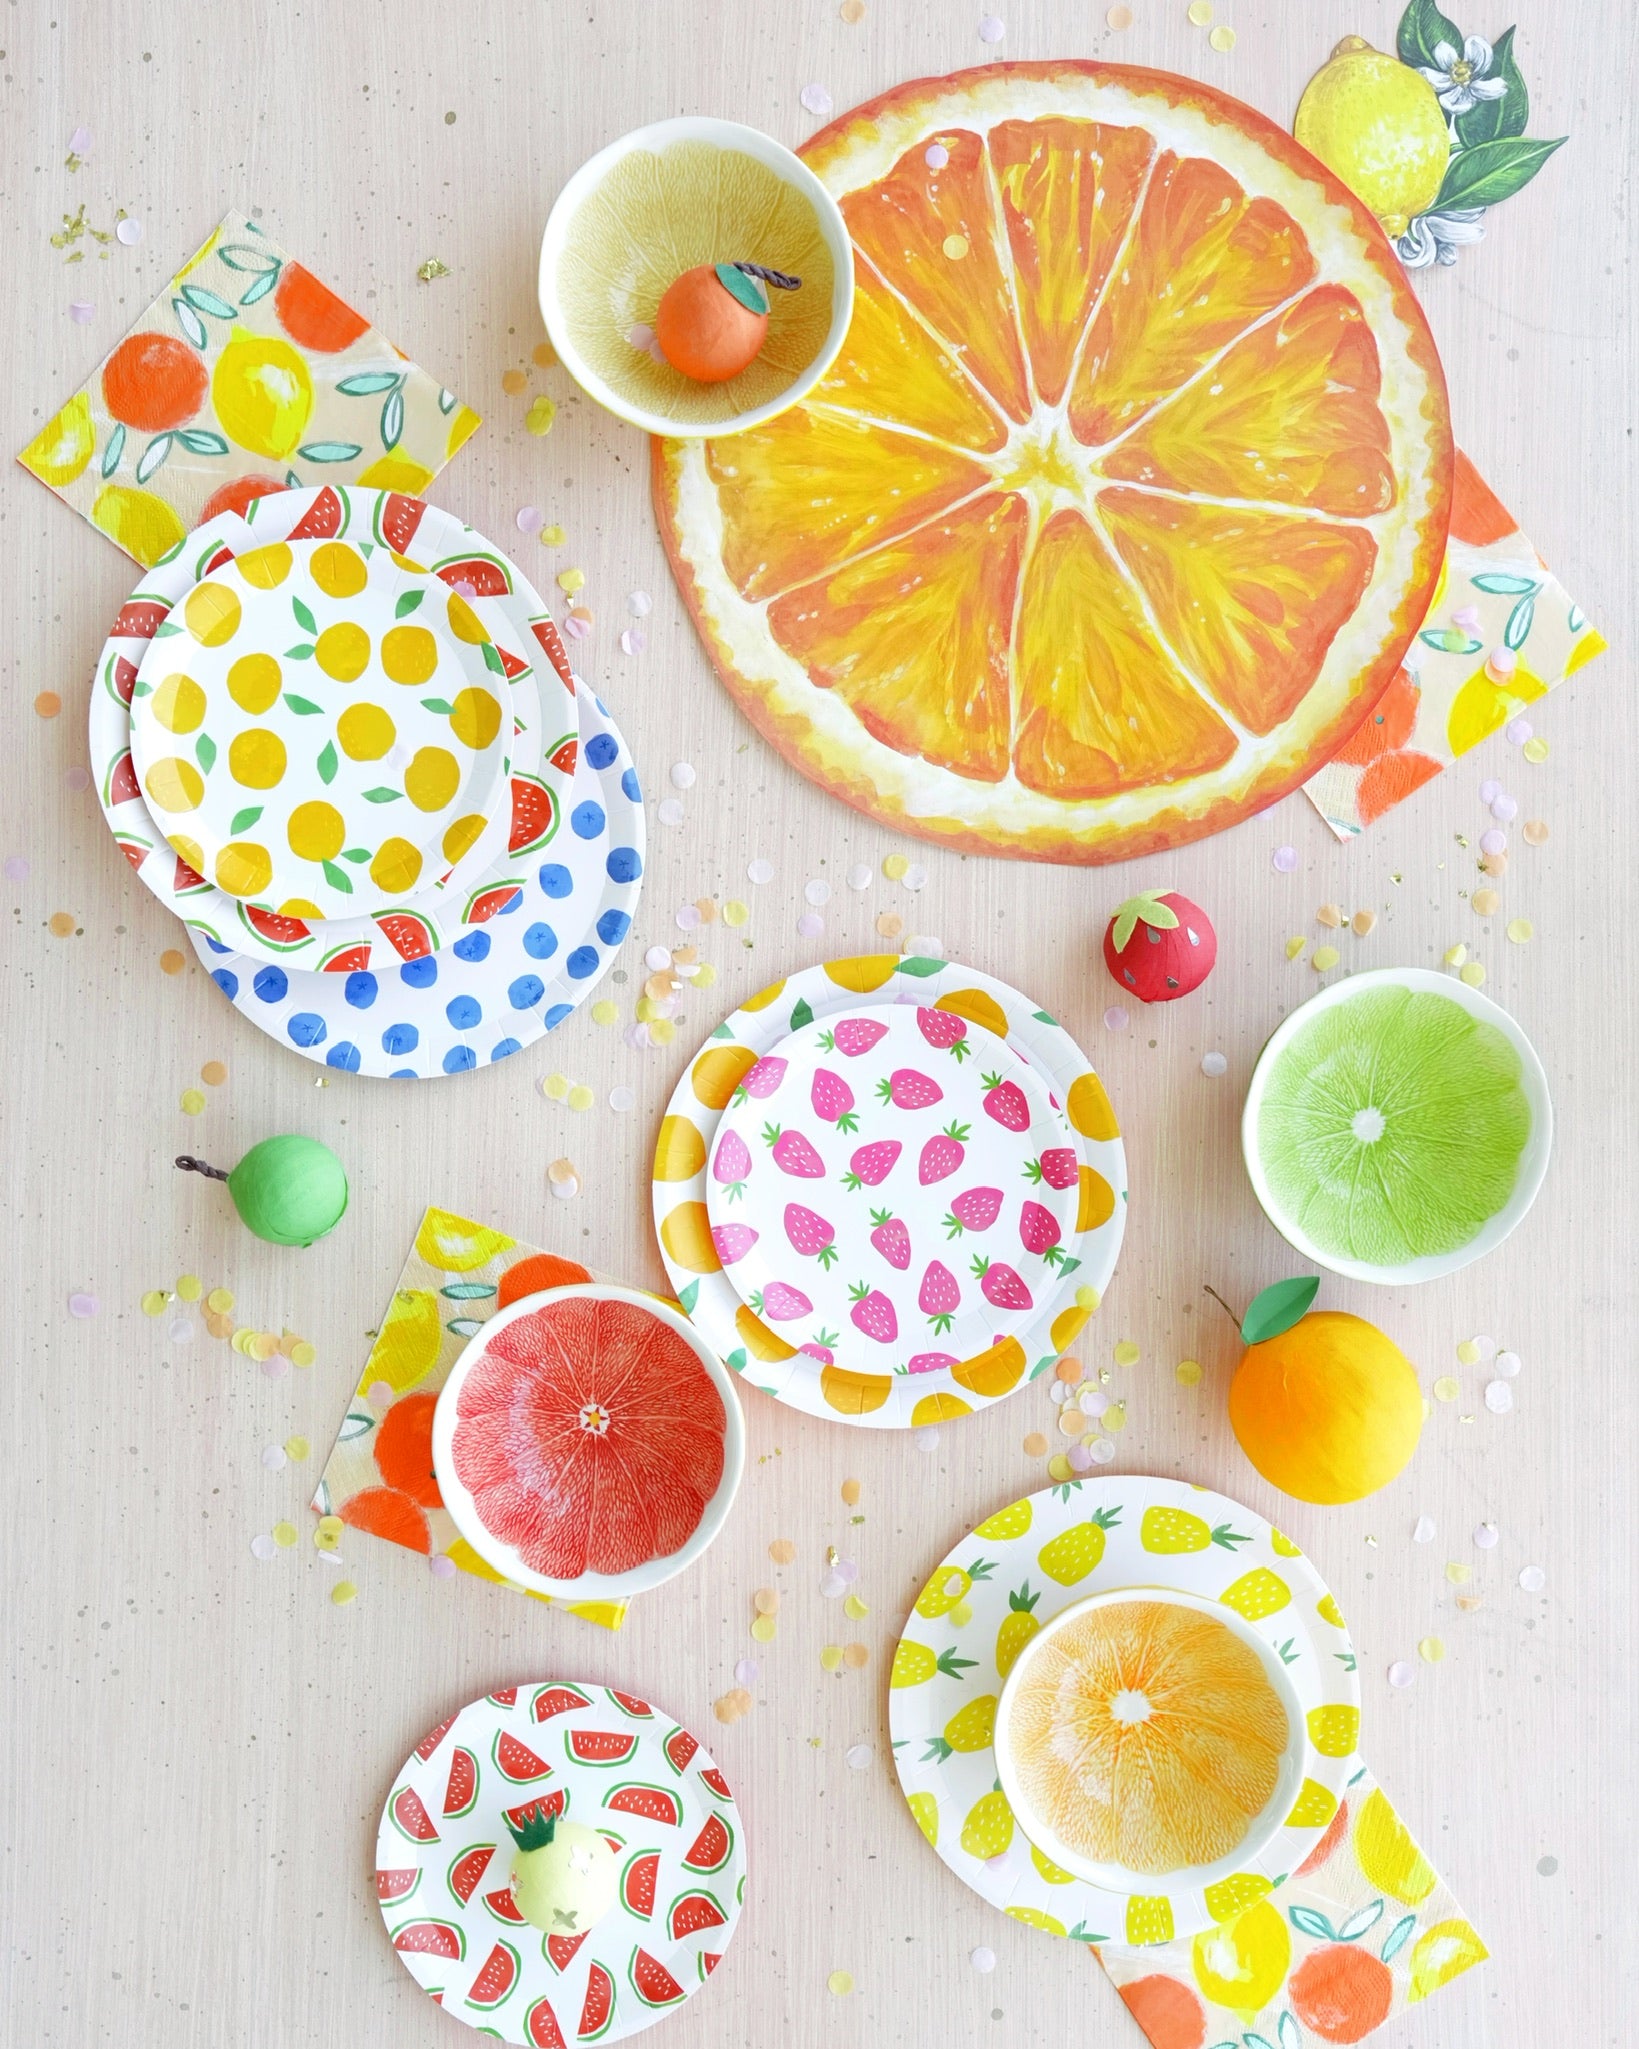 Fruit pattern party supplies and decoration ideas.